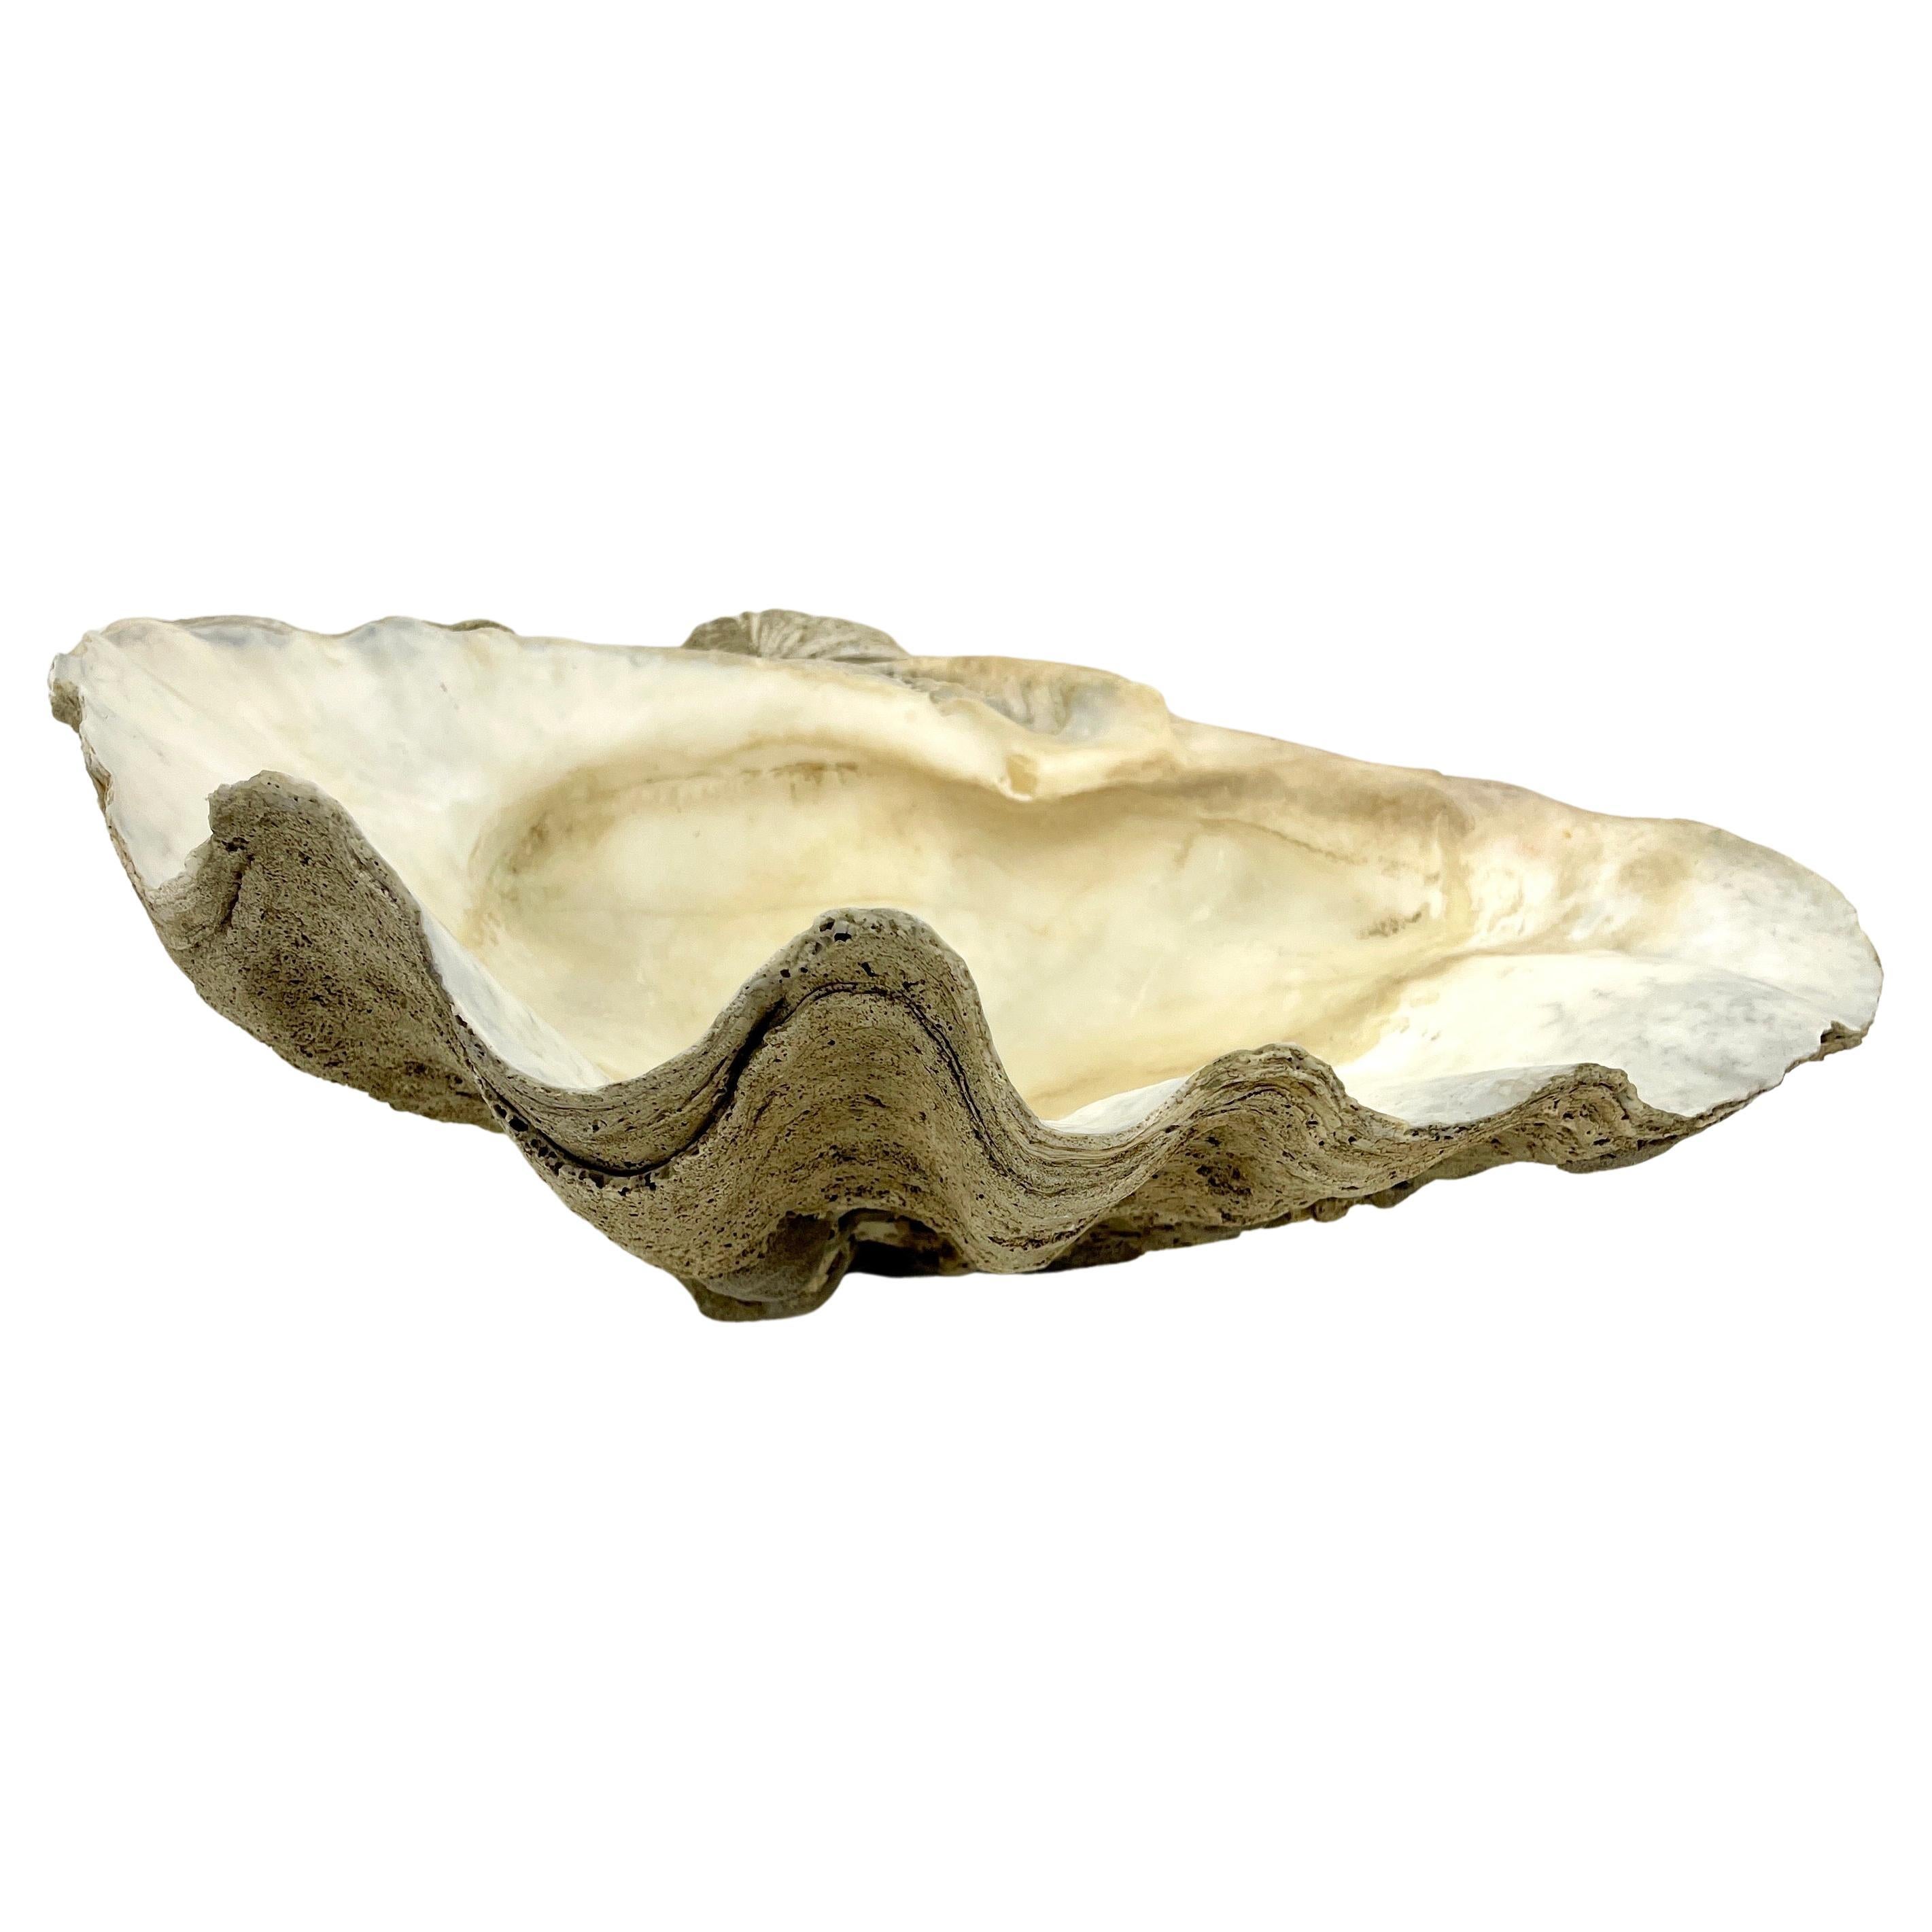 Tridacna Gigas Clam Shell From The South Pacific

Impressive natural large clam shell specimen from the South Pacific Seas. The vintage clam features intricate detailing on the exterior. This piece is very versatile, suitable for any classic,